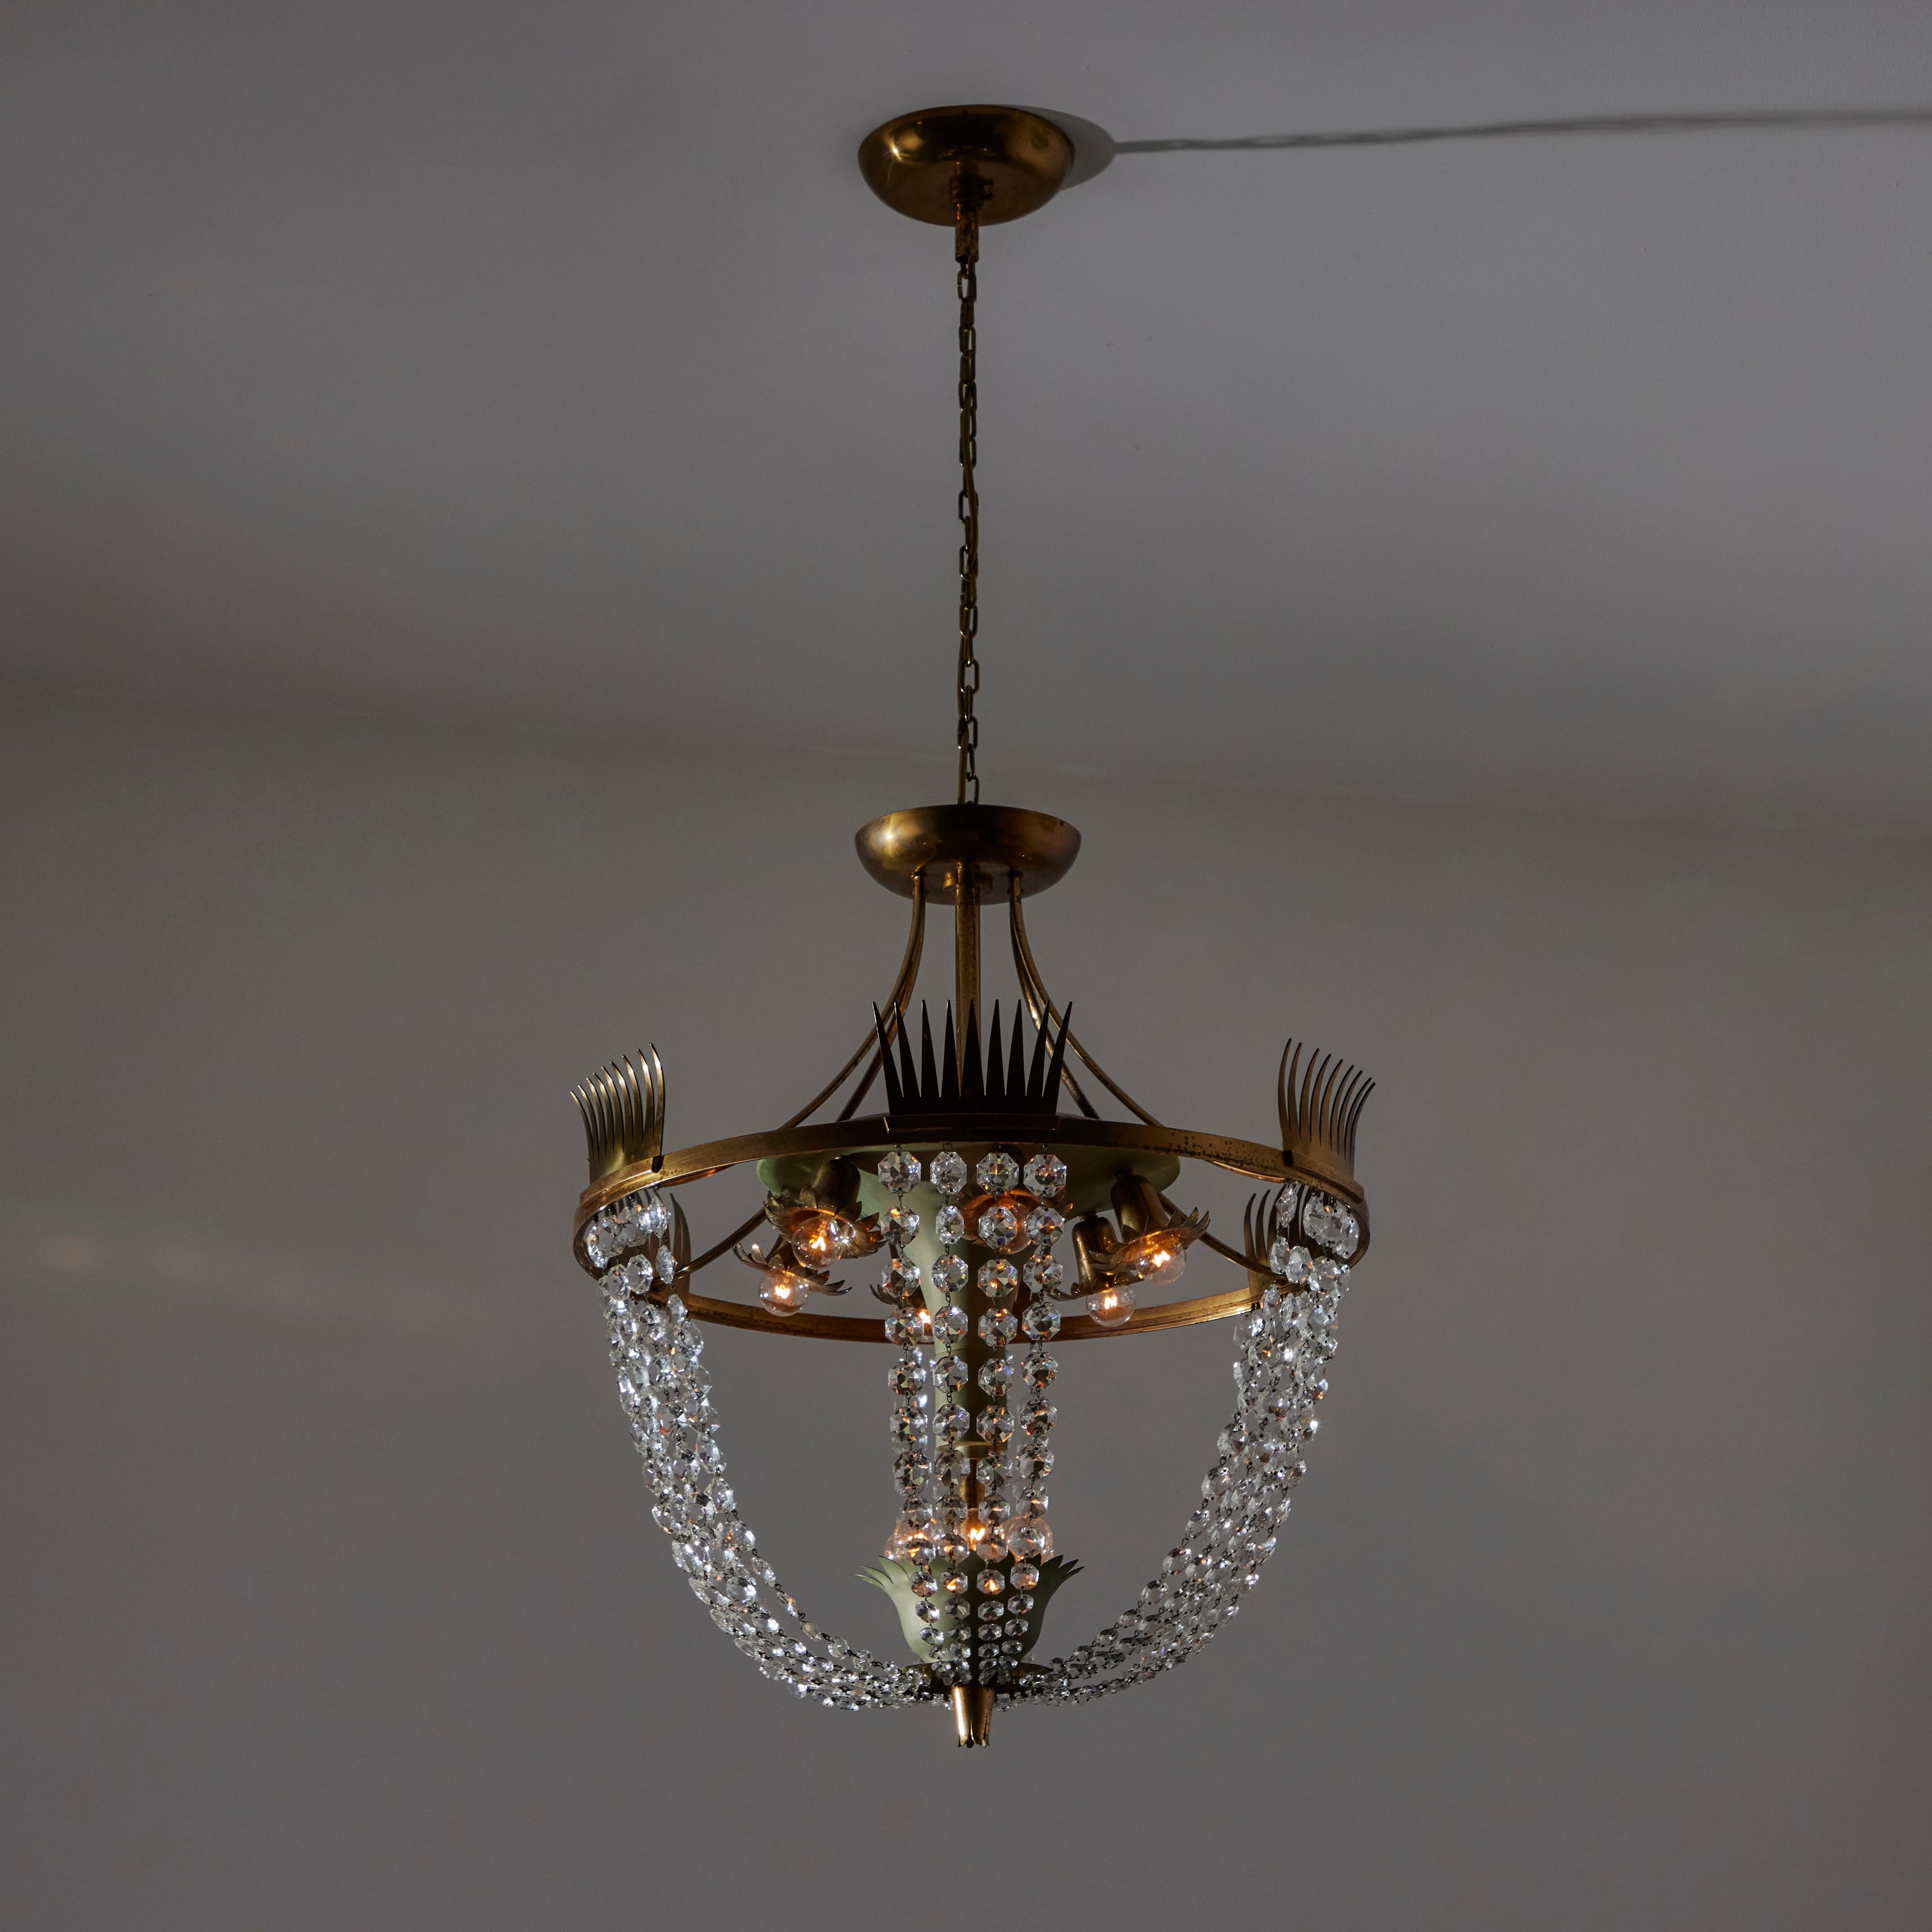 Chandelier by Pietro Chiesa for Fontana Arte, Italy, 1940s. A beautifully crafted ornate glass chandelier comprising of an aged brass framework and beaded glass drapery. Sage green enamel detailing, as well as pronged brass fences on the top frame.